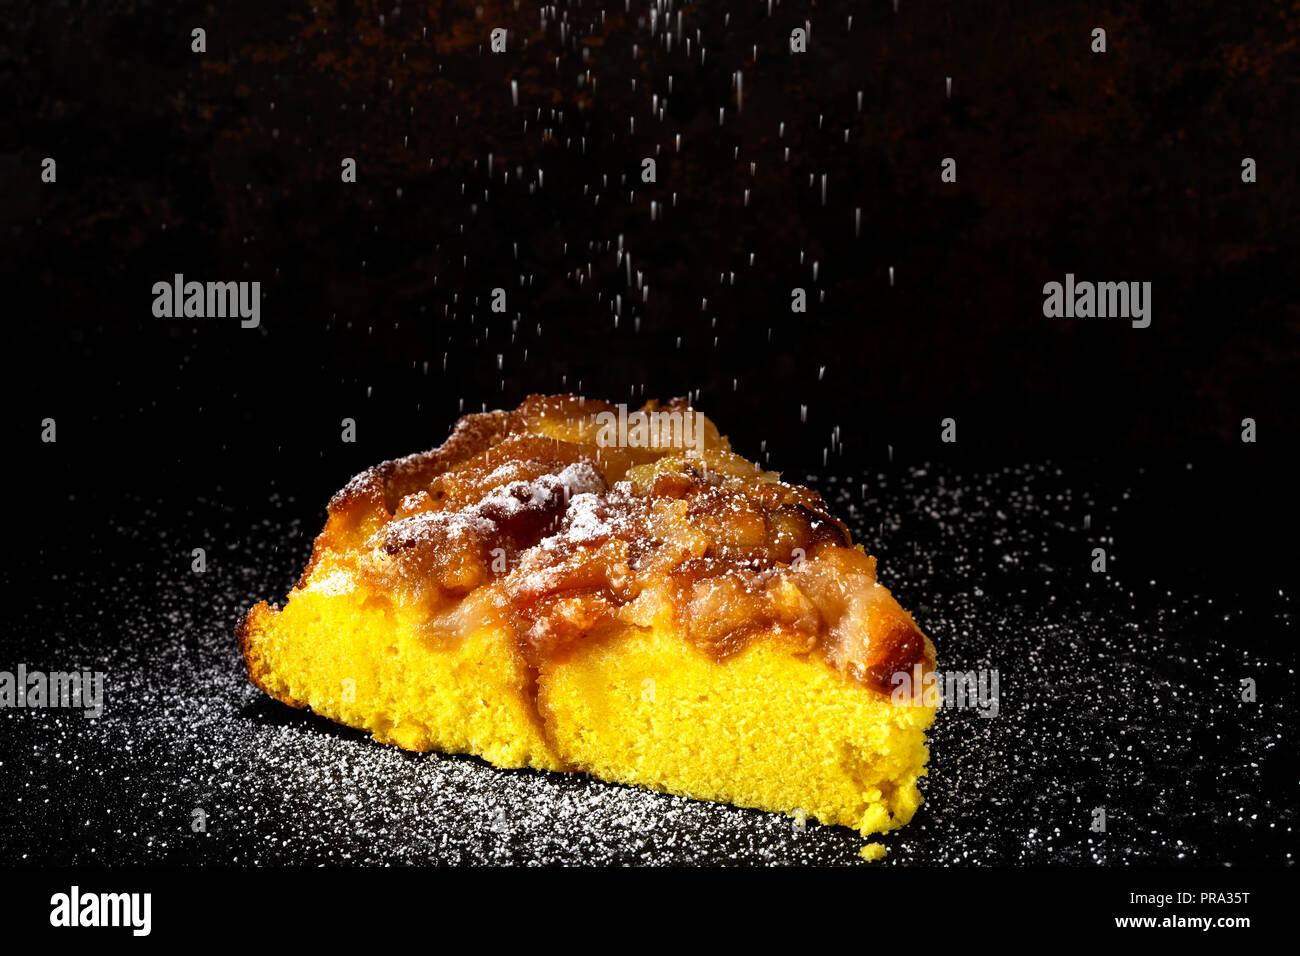 One slice of an apple cake with powder sugar on a dark background Stock Photo